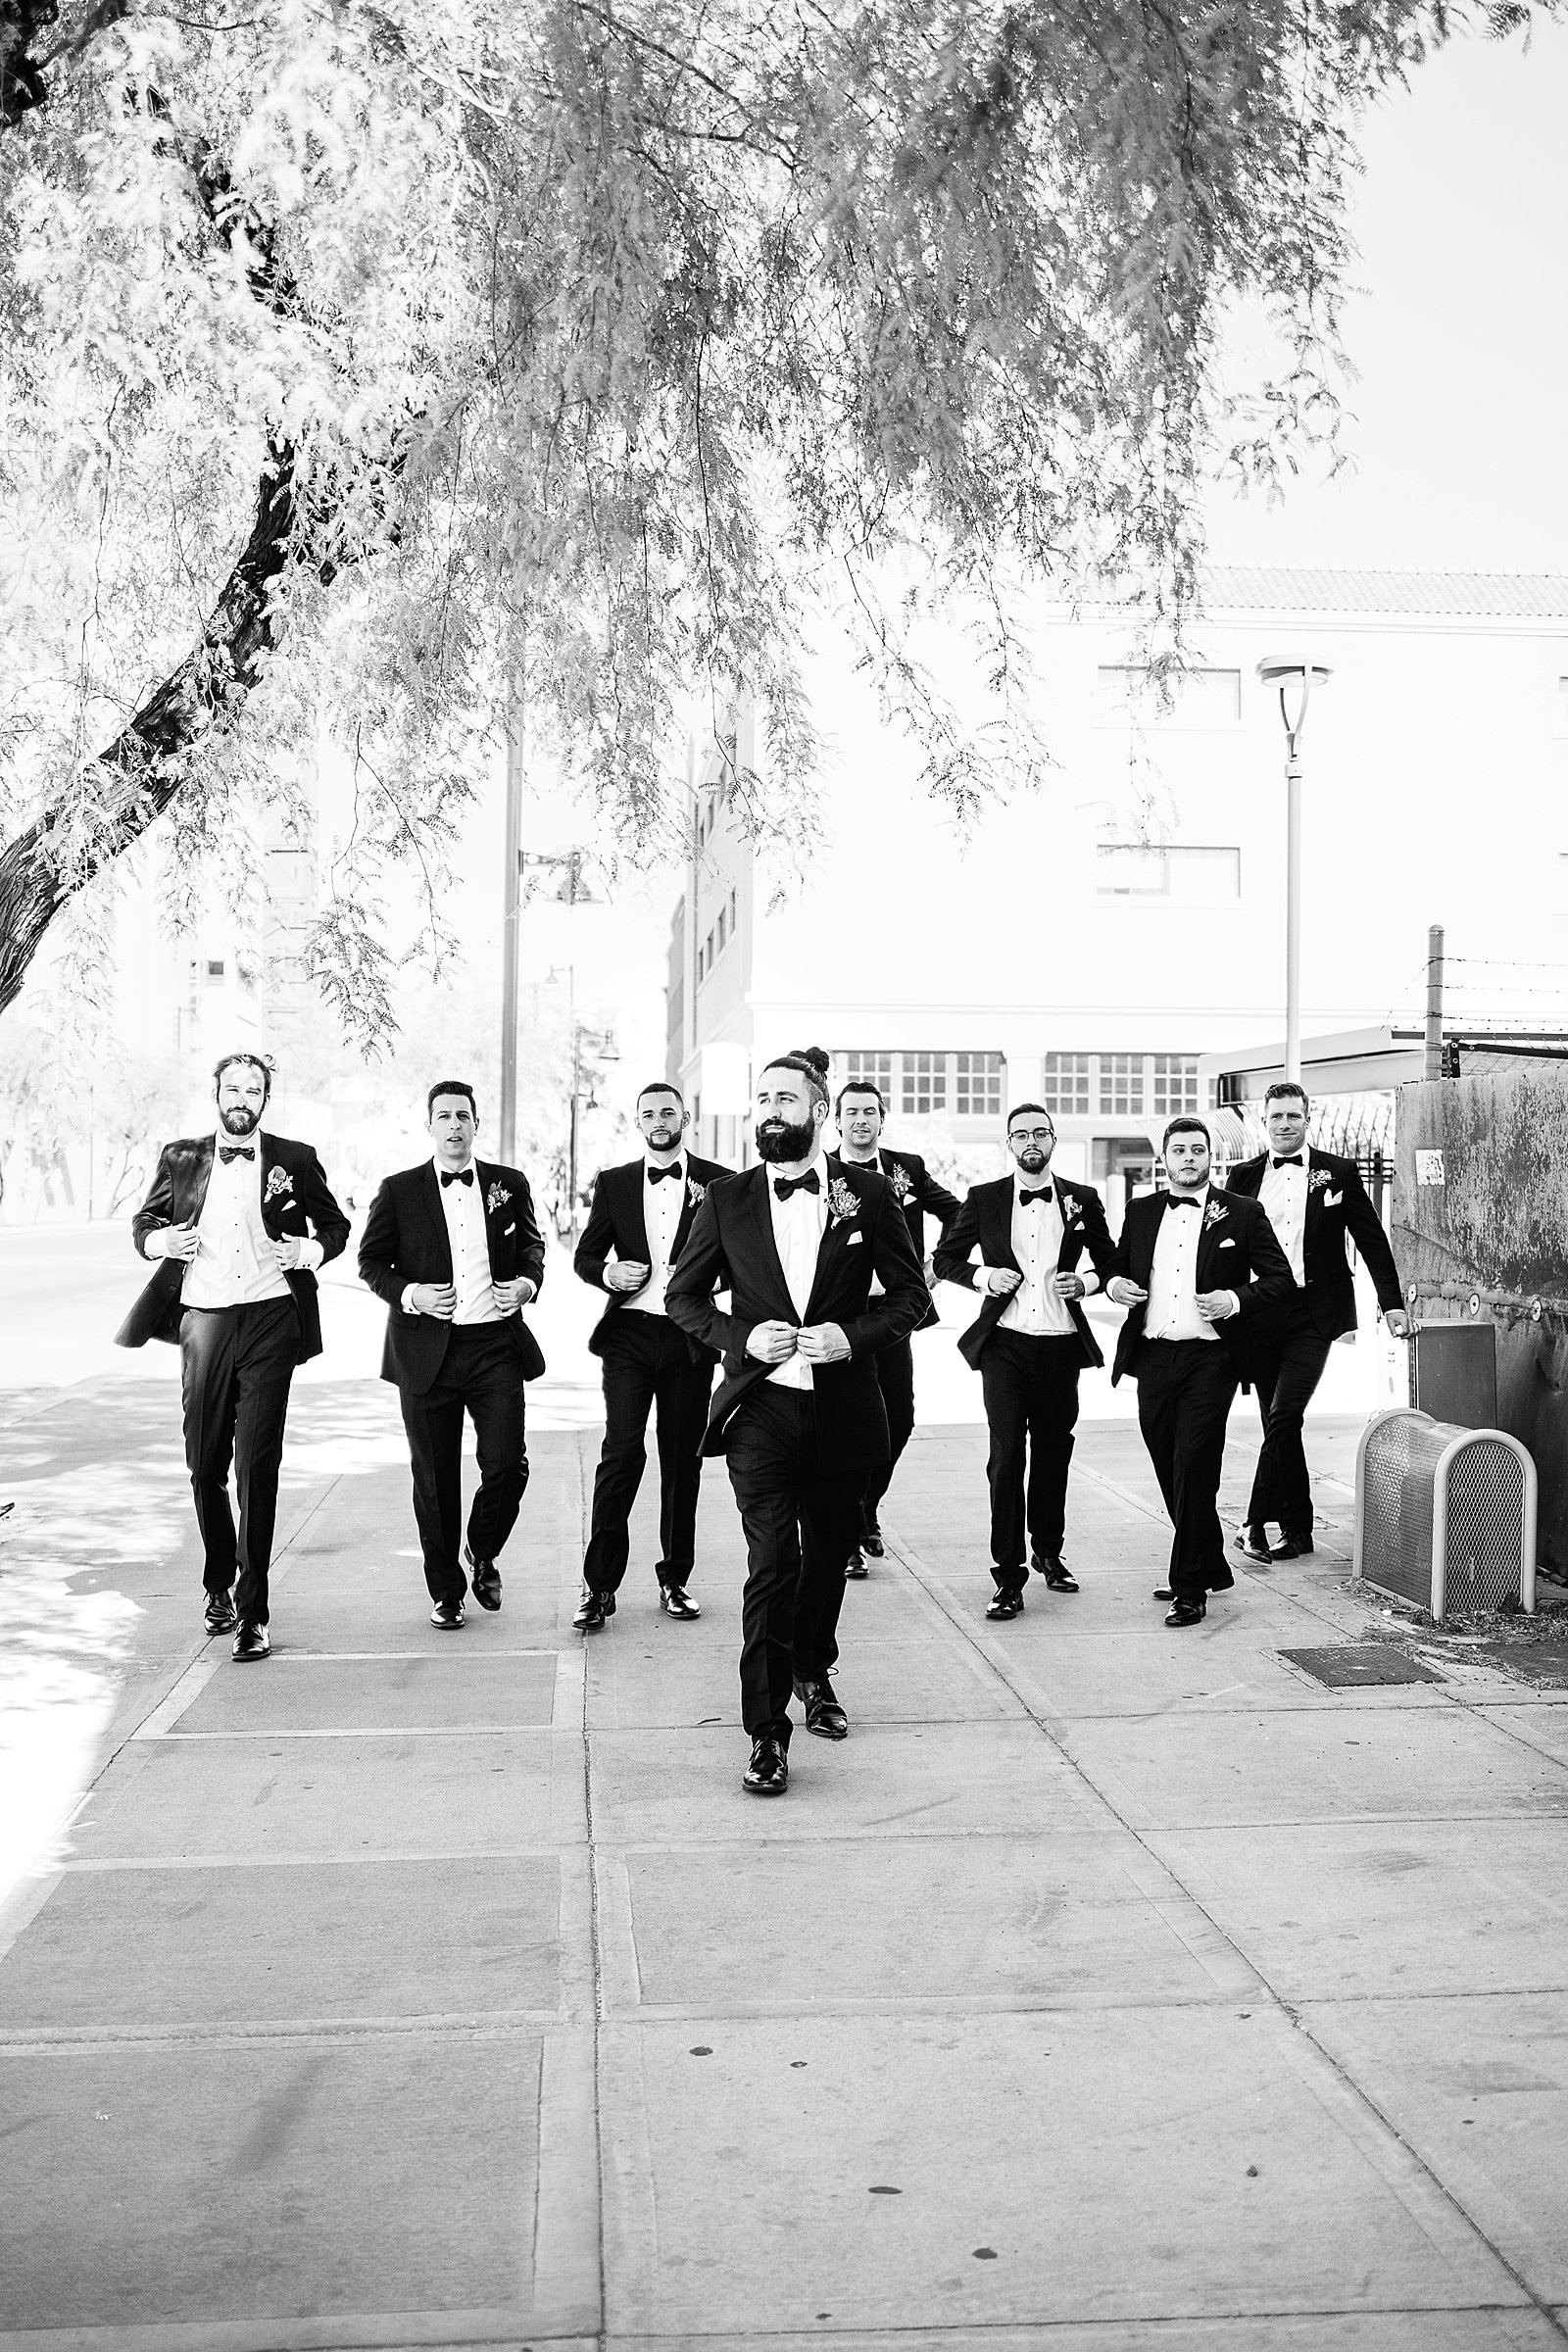 Groom and groomsmen together at a The Ice House wedding by Arizona wedding photographer PMA Photography.